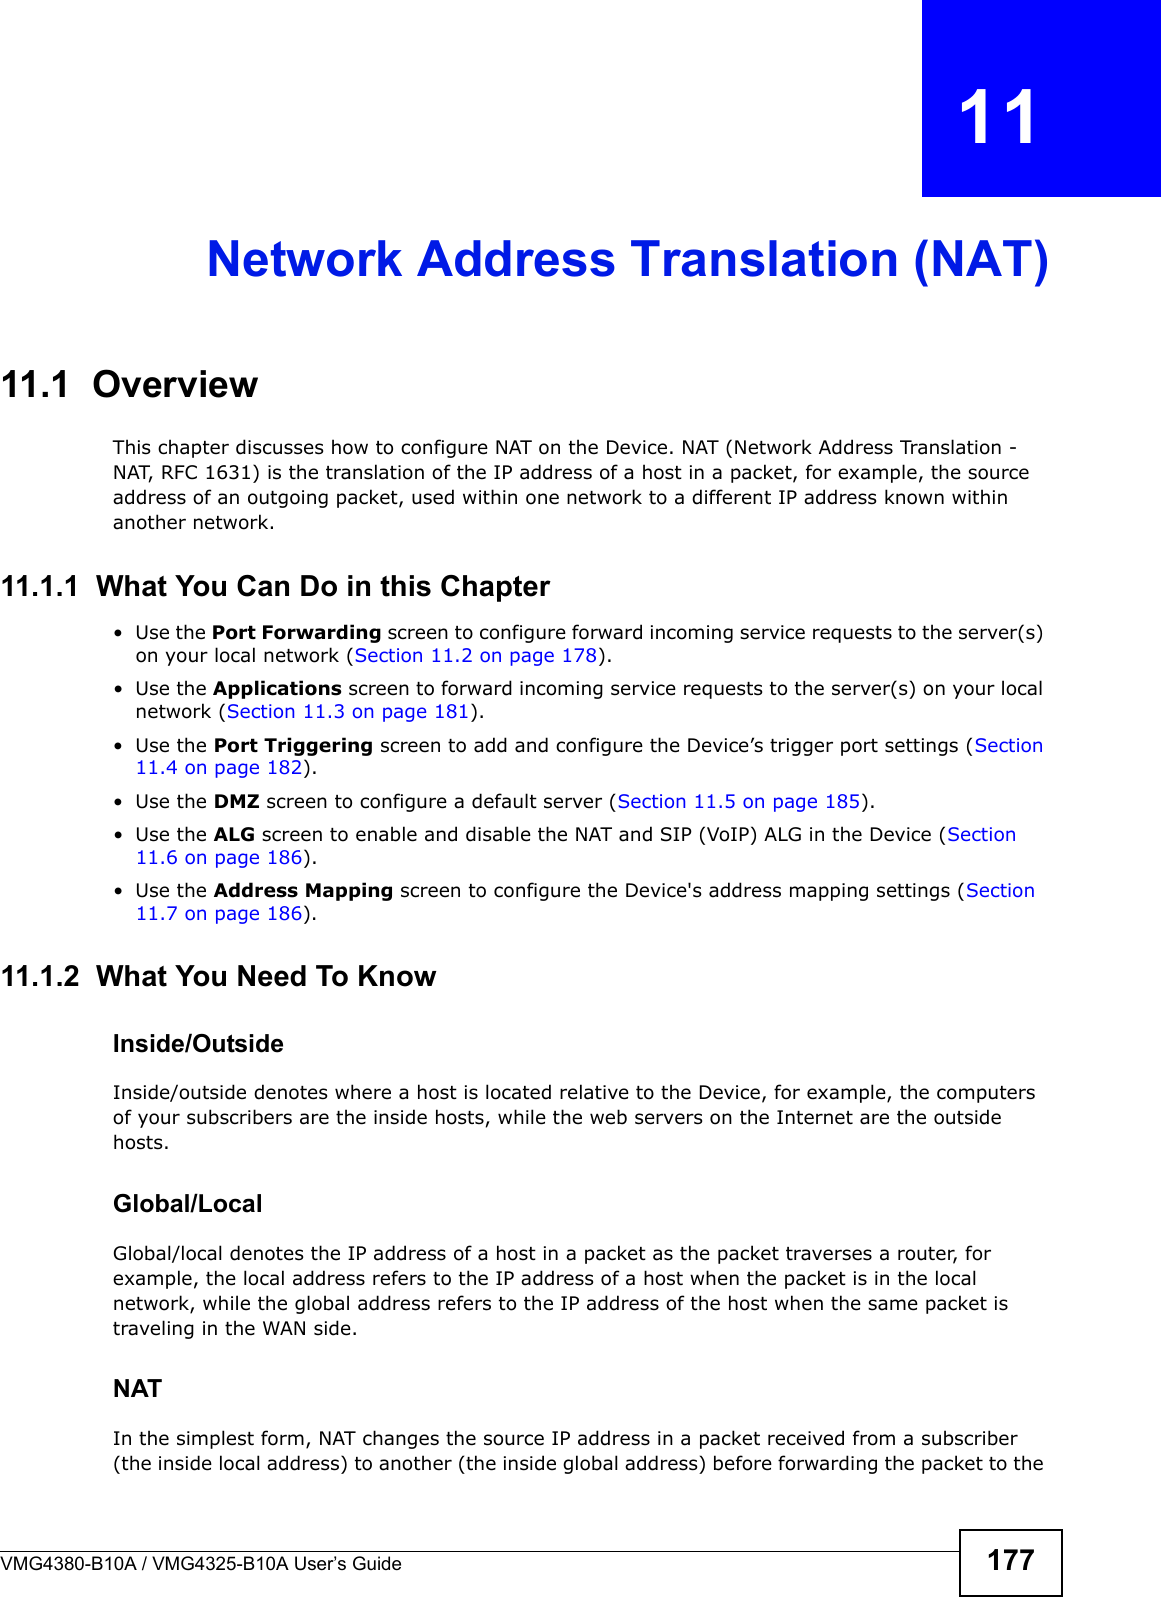 VMG4380-B10A / VMG4325-B10A User’s Guide 177CHAPTER  11Network Address Translation (NAT)11.1  OverviewThis chapter discusses how to configure NAT on the Device. NAT (Network Address Translation - NAT, RFC 1631) is the translation of the IP address of a host in a packet, for example, the sourceaddress of an outgoing packet, used within one network to a different IP address known withinanother network.11.1.1  What You Can Do in this Chapter• Use the Port Forwarding screen to configure forward incoming service requests to the server(s) on your local network (Section 11.2 on page 178). • Use the Applications screen to forward incoming service requests to the server(s) on your local network (Section 11.3 on page 181).• Use the Port Triggering screen to add and configure the Device’s trigger port settings (Section 11.4 on page 182).• Use the DMZ screen to configure a default server (Section 11.5 on page 185).• Use the ALG screen to enable and disable the NAT and SIP (VoIP) ALG in the Device (Section 11.6 on page 186).• Use the Address Mapping screen to configure the Device&apos;s address mapping settings (Section 11.7 on page 186). 11.1.2  What You Need To KnowInside/OutsideInside/outside denotes where a host is located relative to the Device, for example, the computers of your subscribers are the inside hosts, while the web servers on the Internet are the outside hosts. Global/LocalGlobal/local denotes the IP address of a host in a packet as the packet traverses a router, for example, the local address refers to the IP address of a host when the packet is in the local network, while the global address refers to the IP address of the host when the same packet is traveling in the WAN side. NATIn the simplest form, NAT changes the source IP address in a packet received from a subscriber (the inside local address) to another (the inside global address) before forwarding the packet to the 